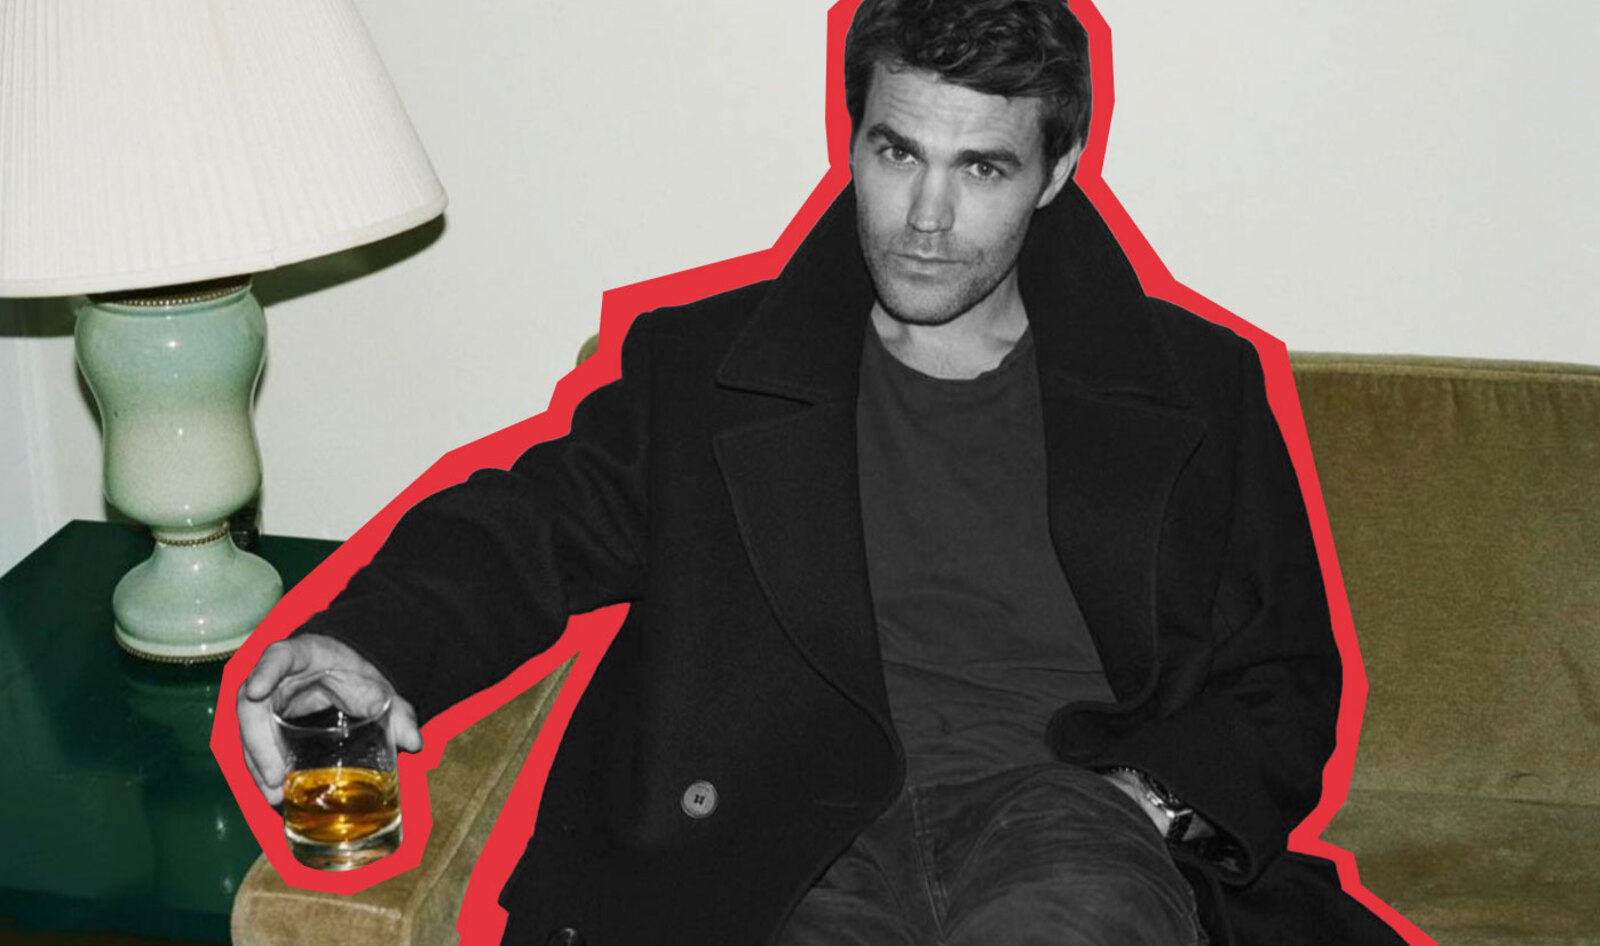 Why&nbsp;<i>The Vampire Diaries</i>' Paul Wesley Is More Interested in Vegan Bourbon Than Blood